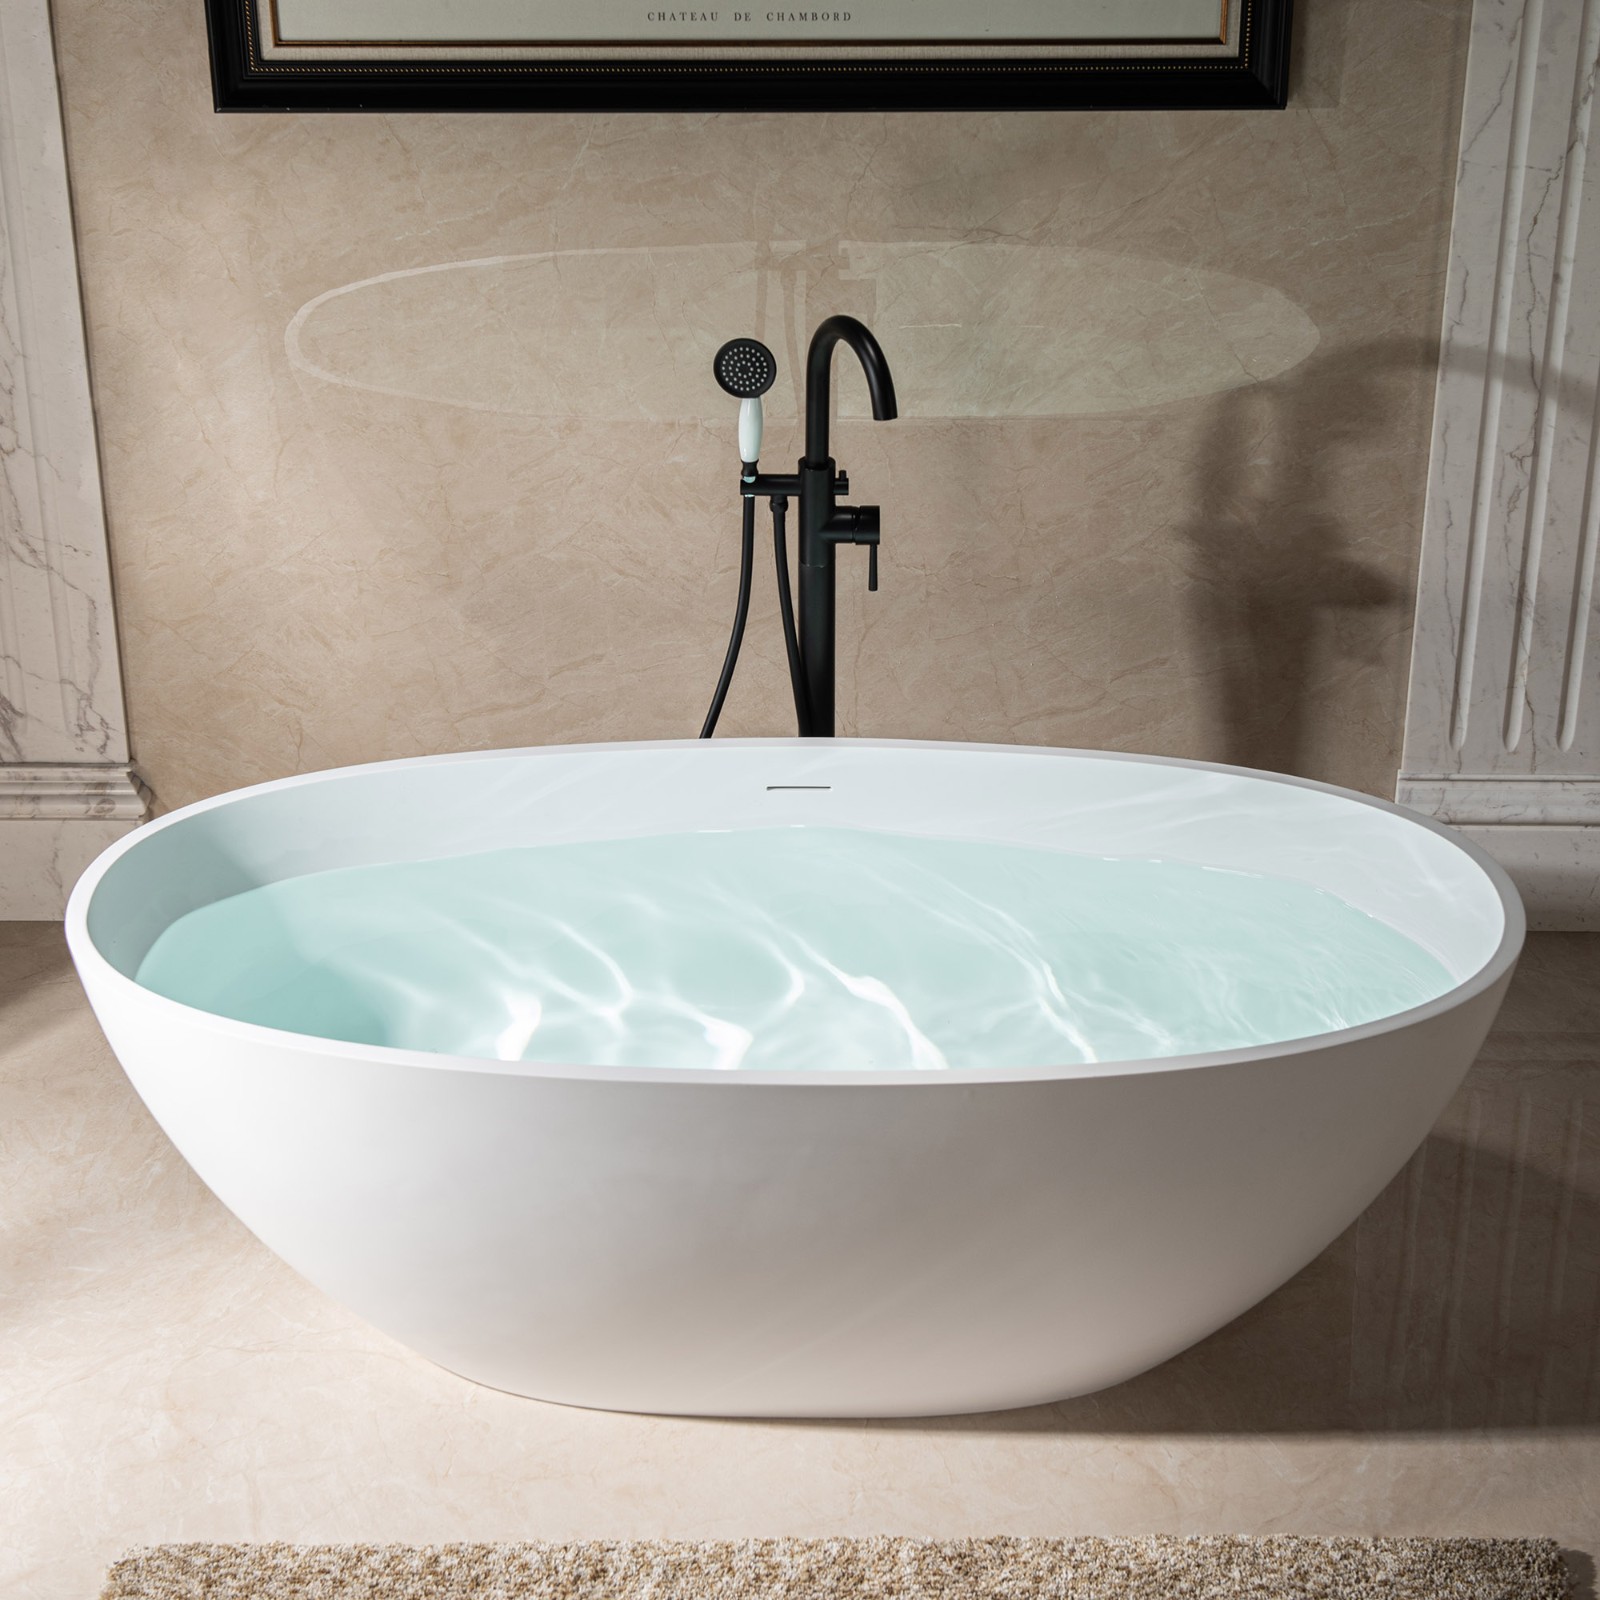  WOODBRIDGE 67 in. x 30.75 in. Luxury Contemporary Solid Surface Freestanding Bathtub in Matte White_602